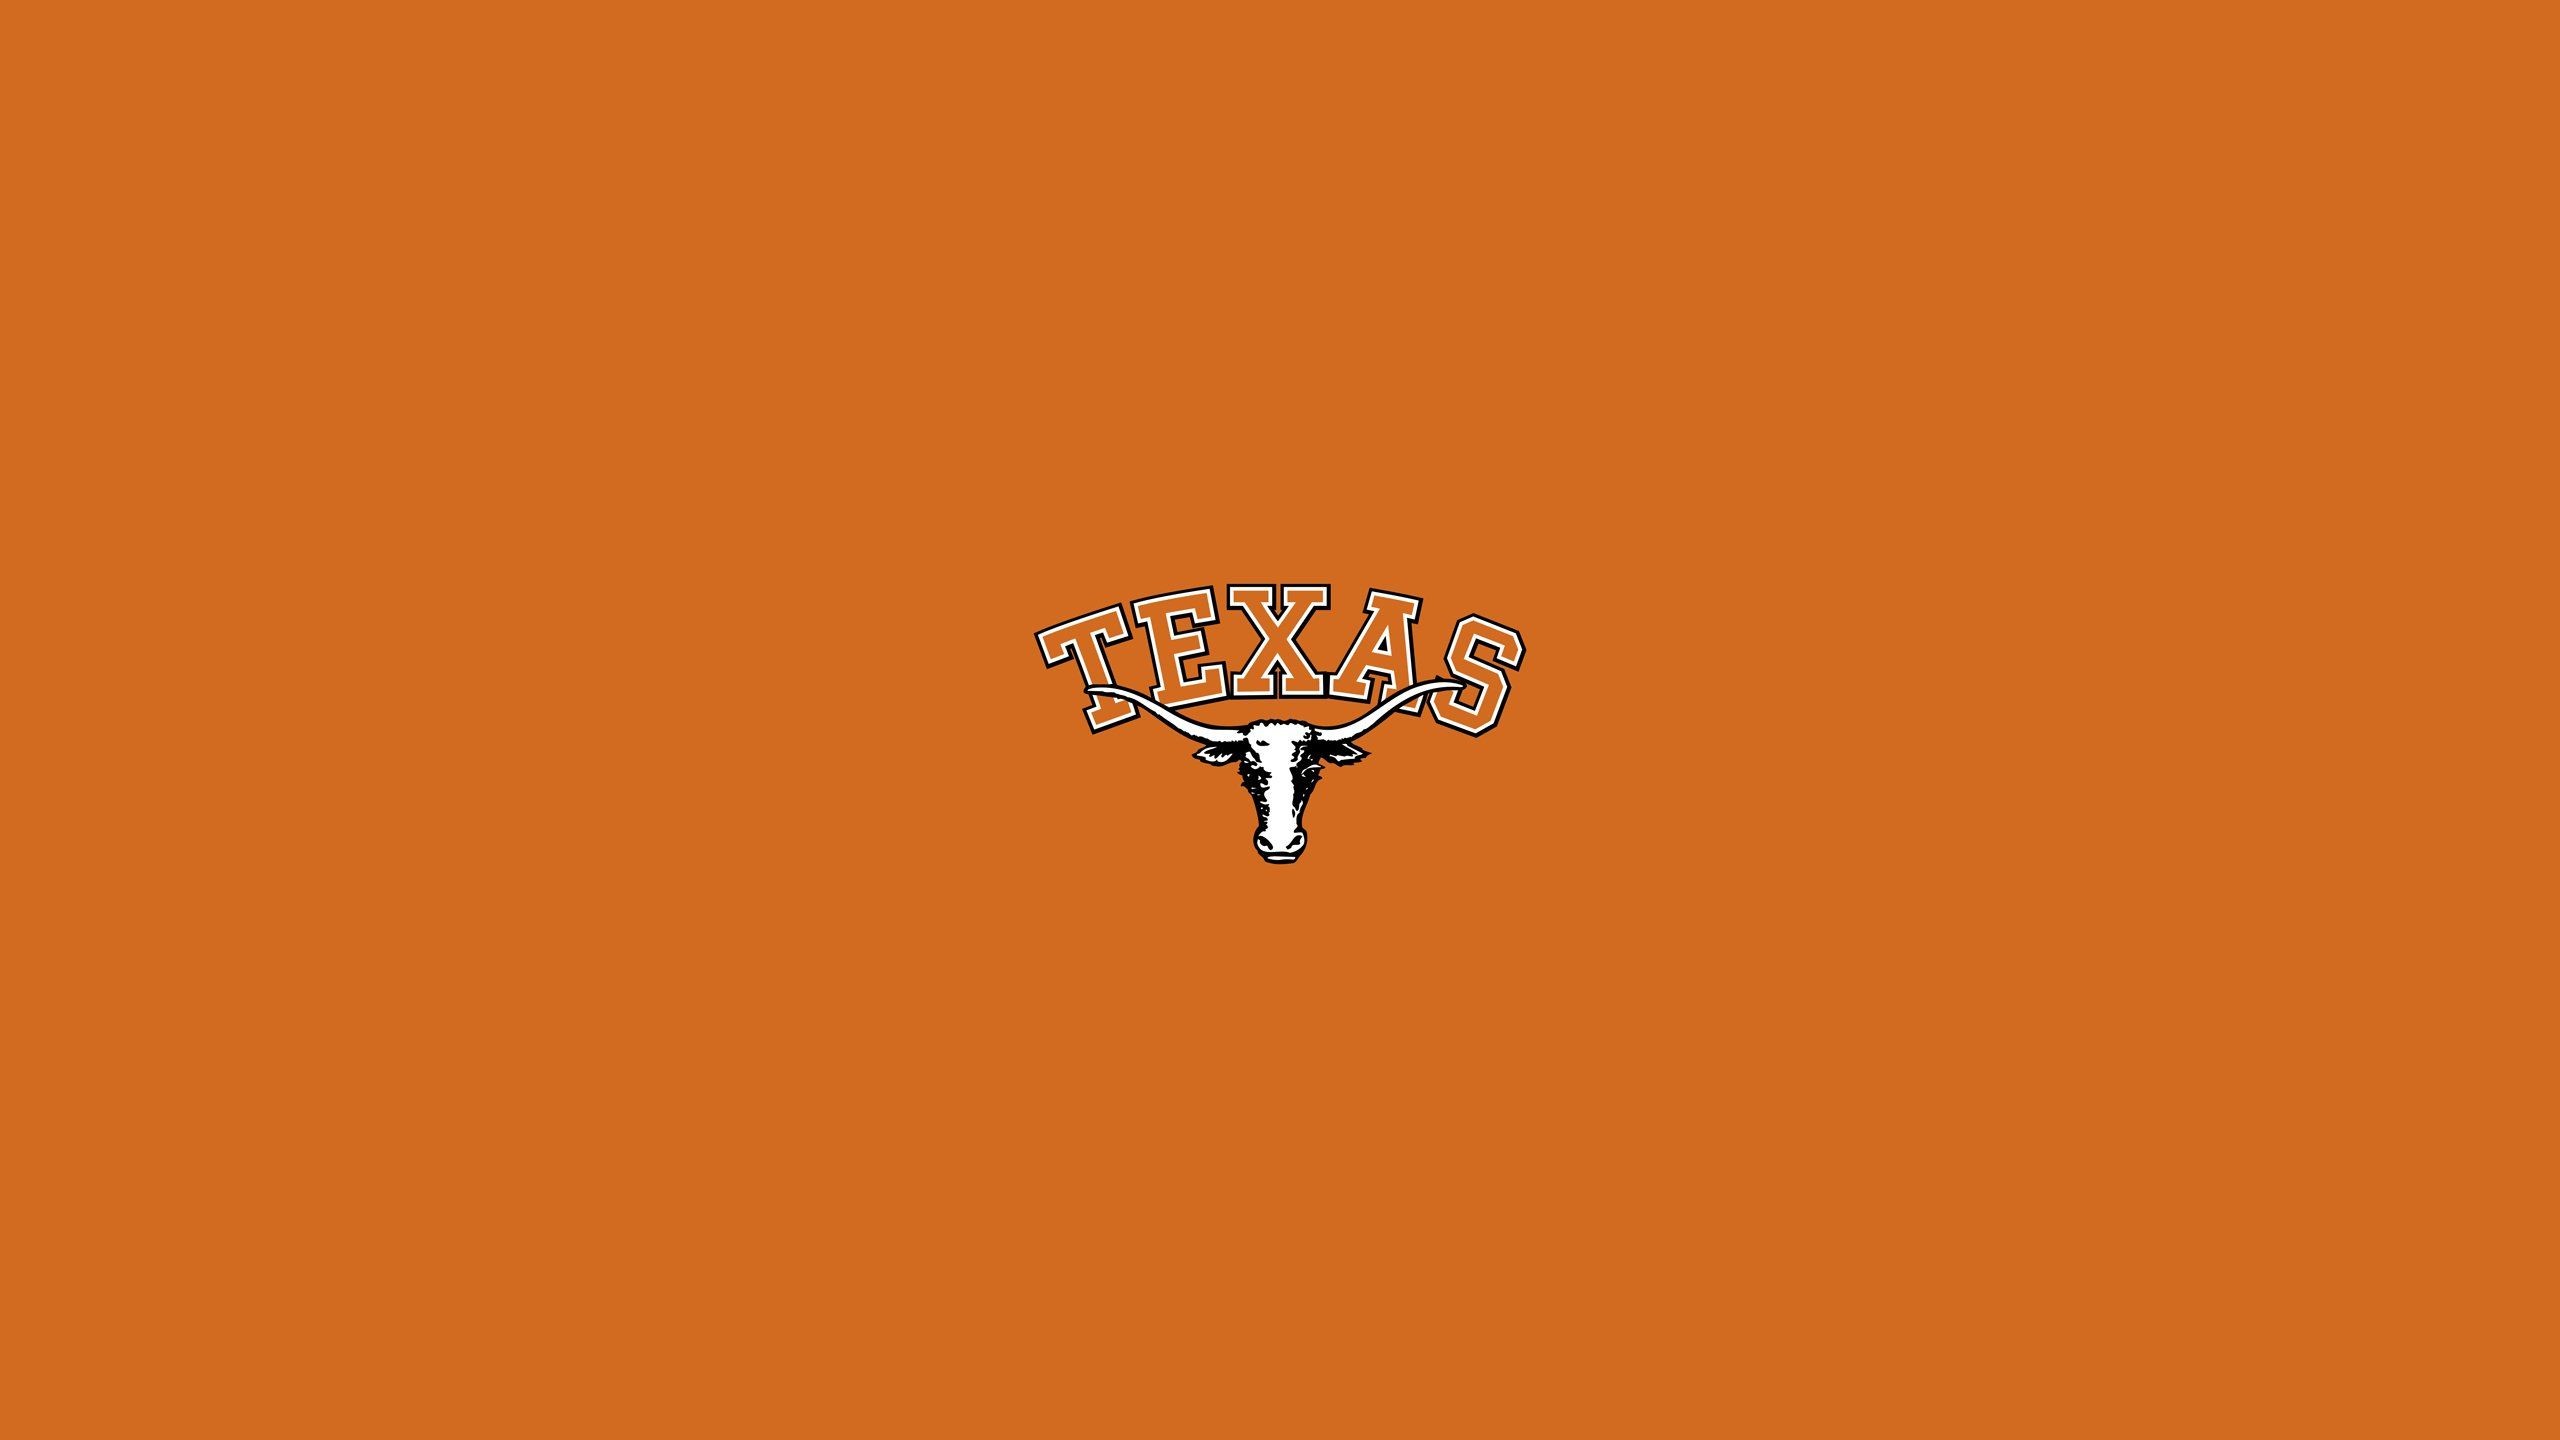 2560x1440 Texas Longhorns iPhone Wallpapers for Any iPhone Model Texas Longhorns Logo Wallpapers  Wallpapers)